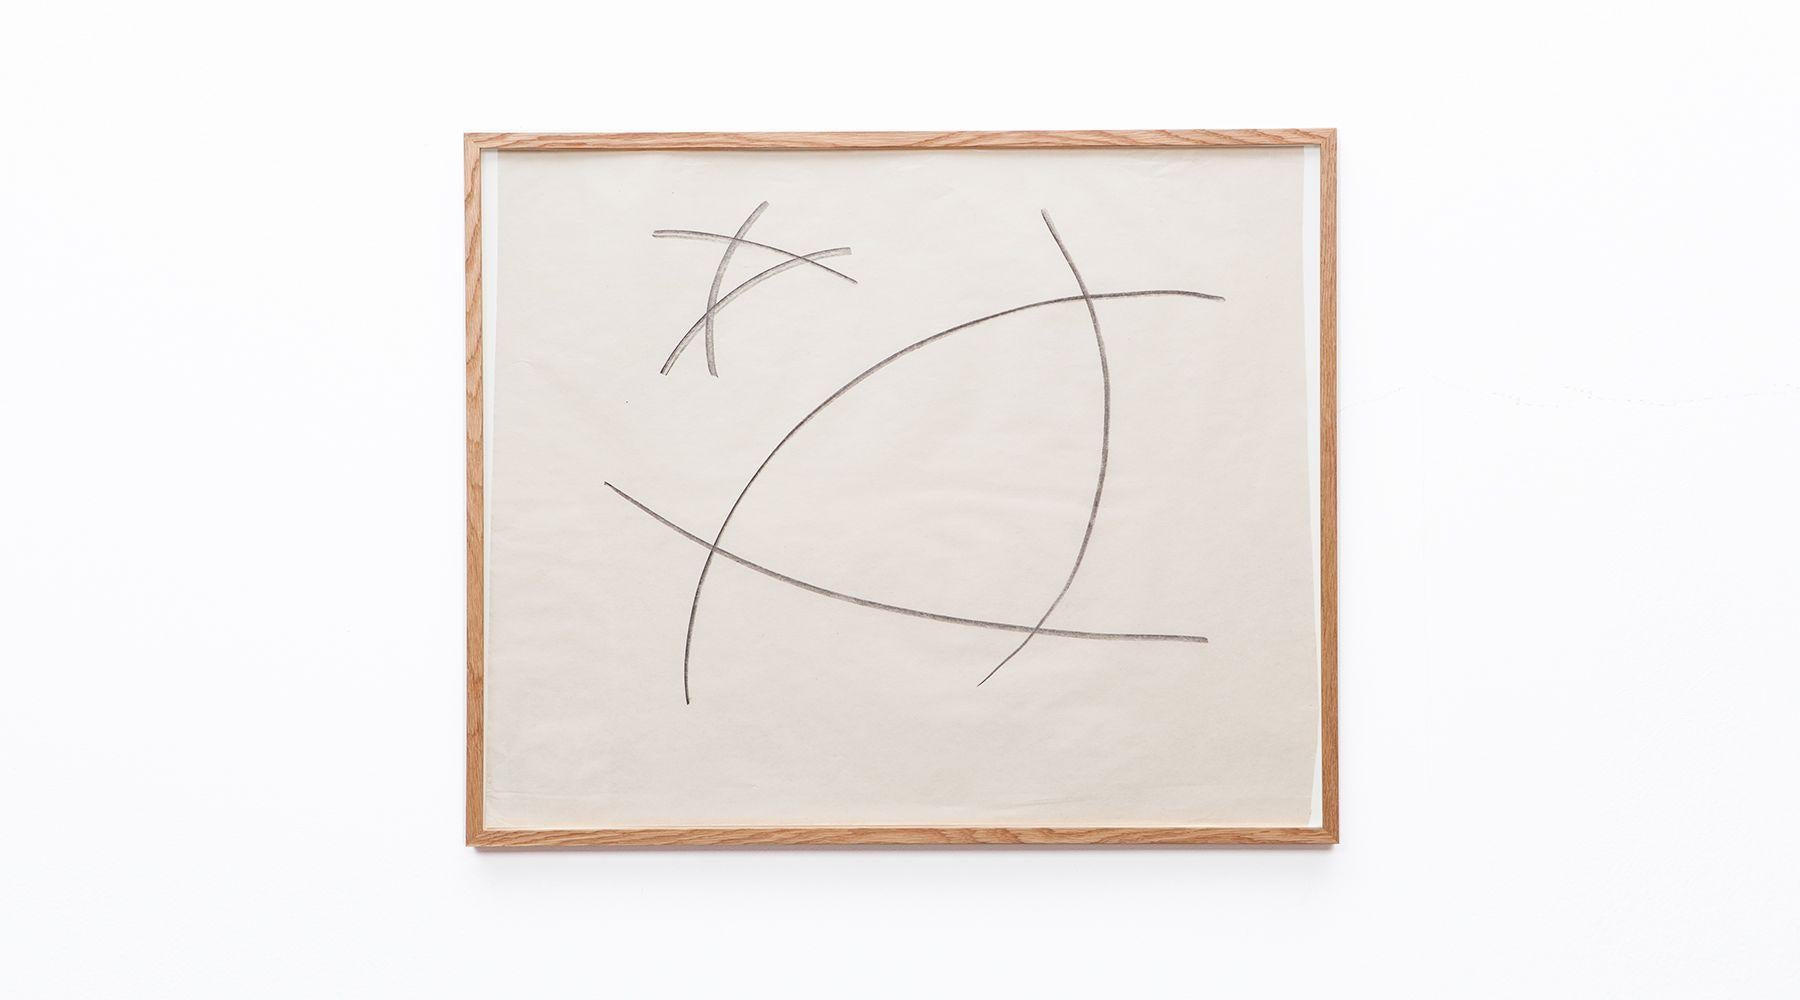 Drawing from German graphik-designer, photographer and painter Anton Stankowski. Choal on very fine, slightly tinted paper. The work is signed by the artist and comes in a high-quality wooden frame. Measures: H 66 / W 80.5 cm. It is available as a